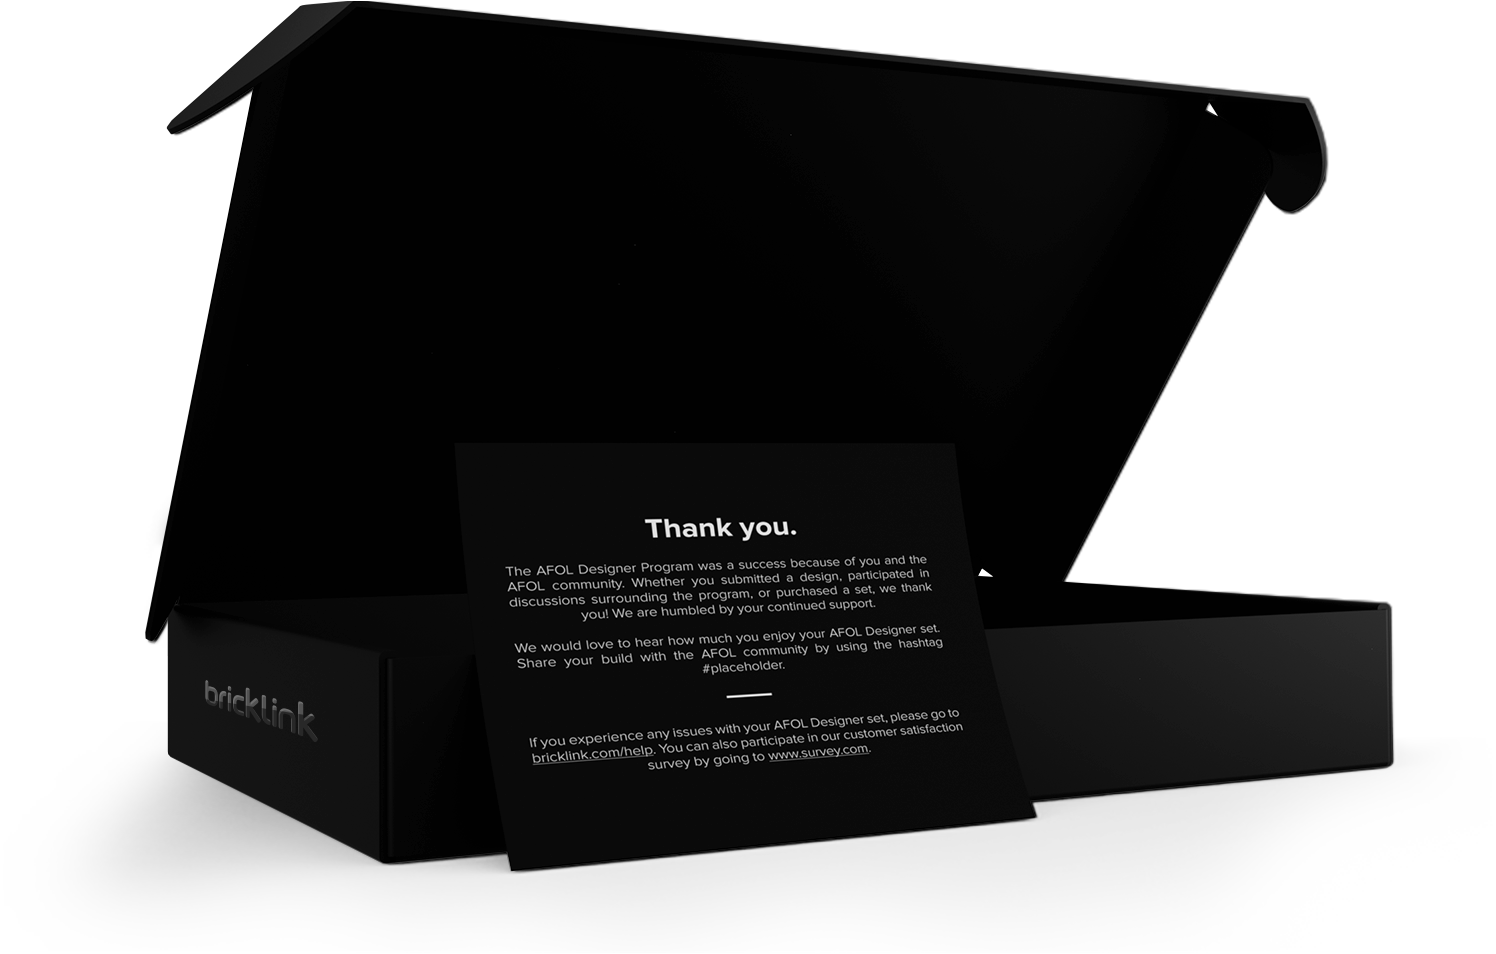 Render of inner box featuring a thankyou message on a card.